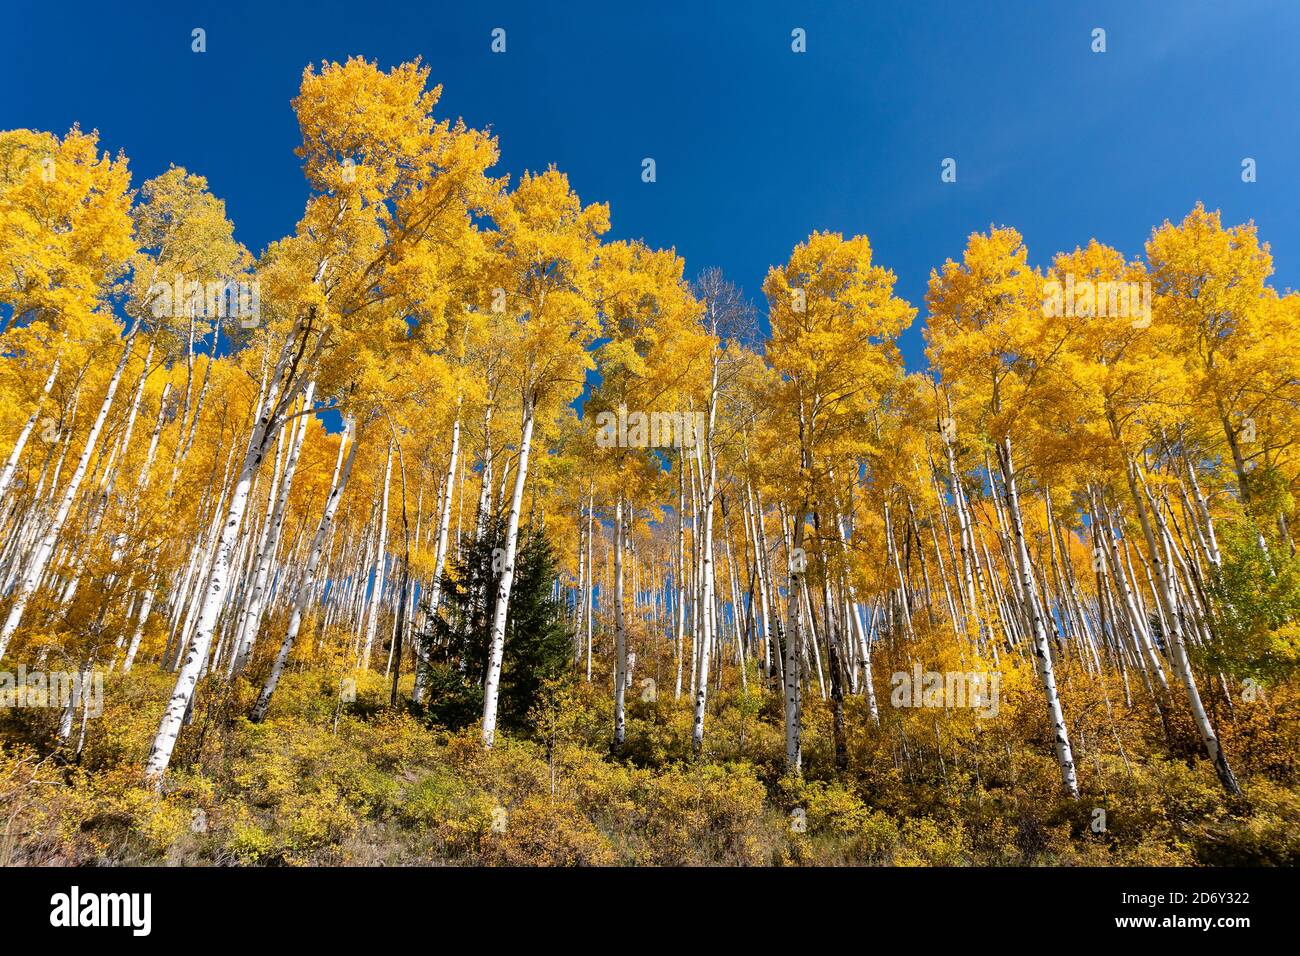 Quaking aspen trees with fall colors and blue sky near Rico, Colorado Stock Photo